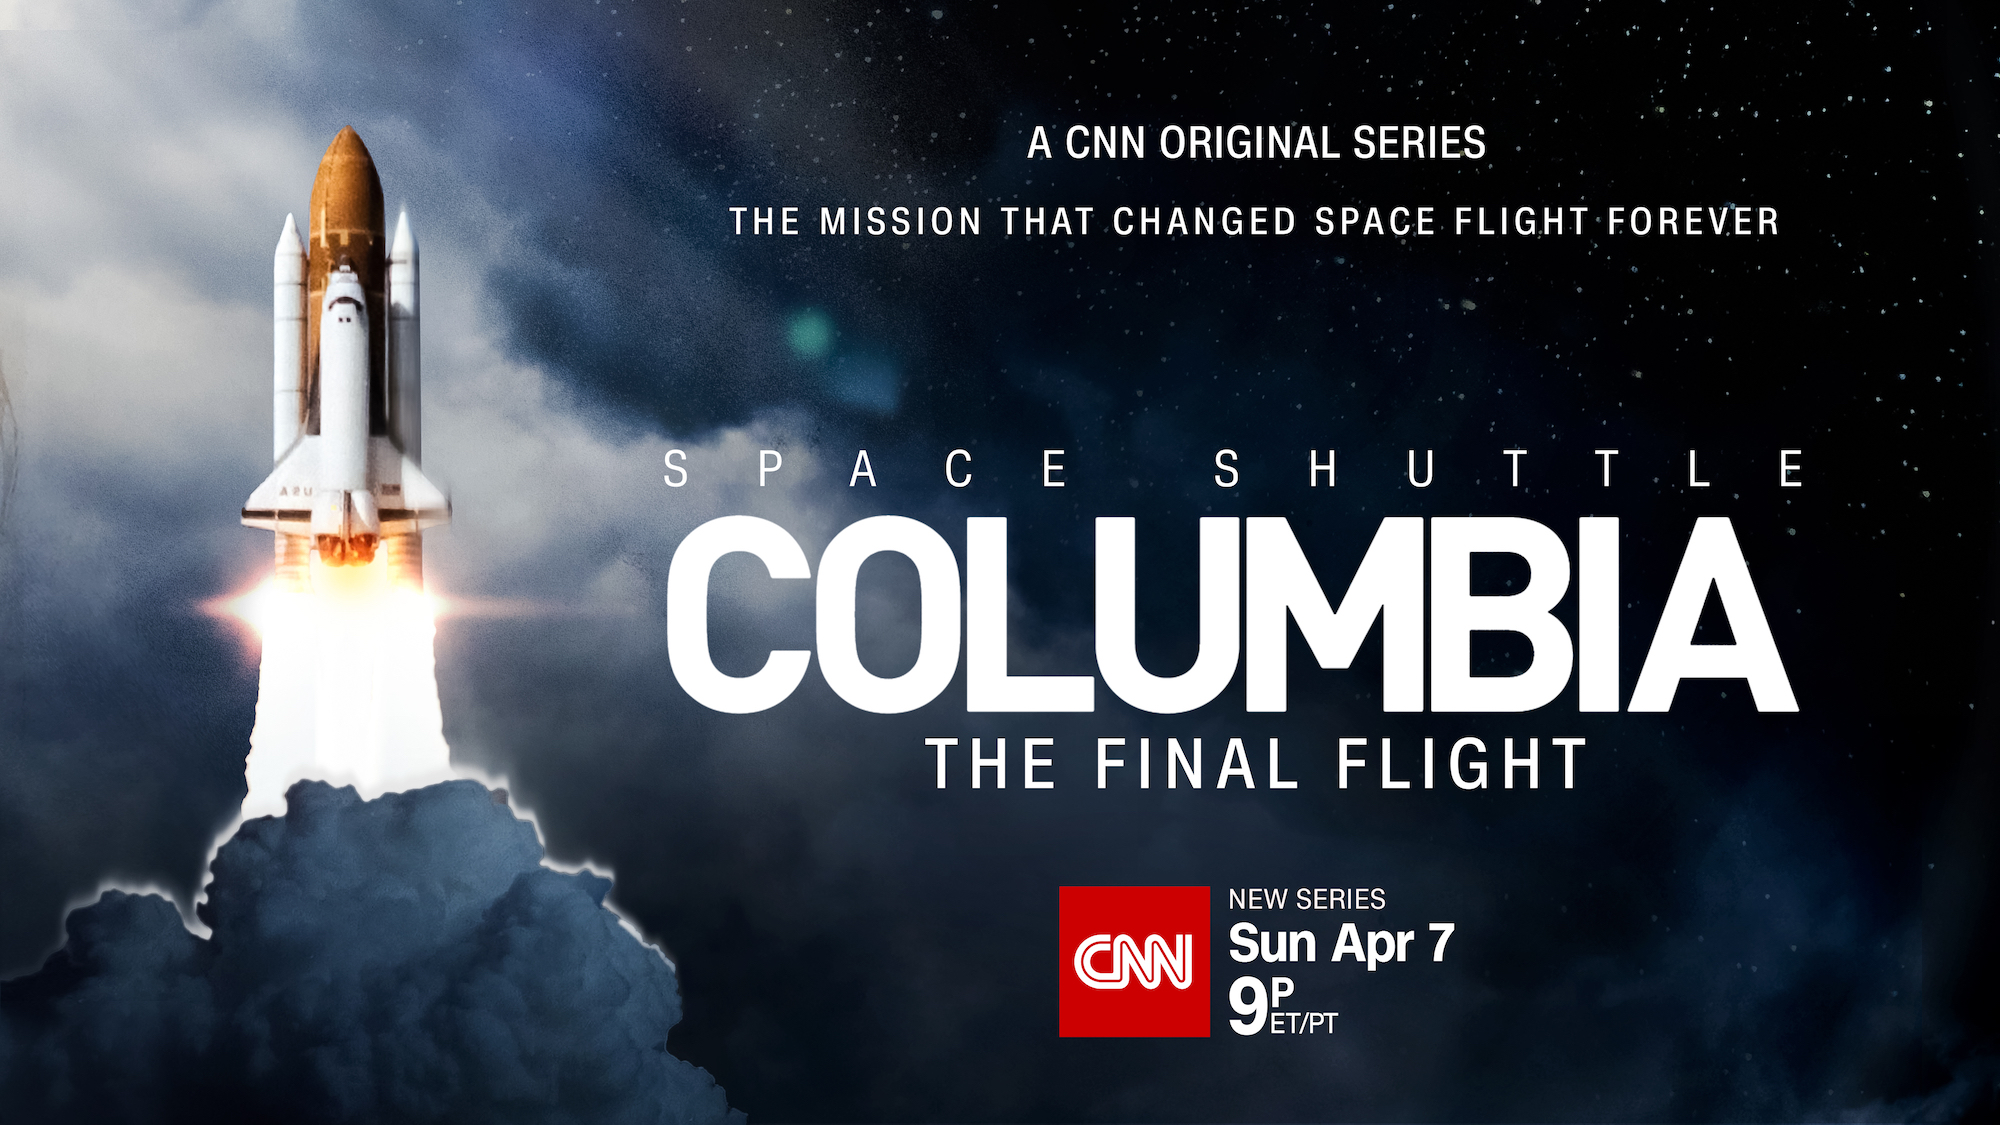 CNN explores NASA’s Columbia shuttle tragedy in riveting docuseries (video) Space